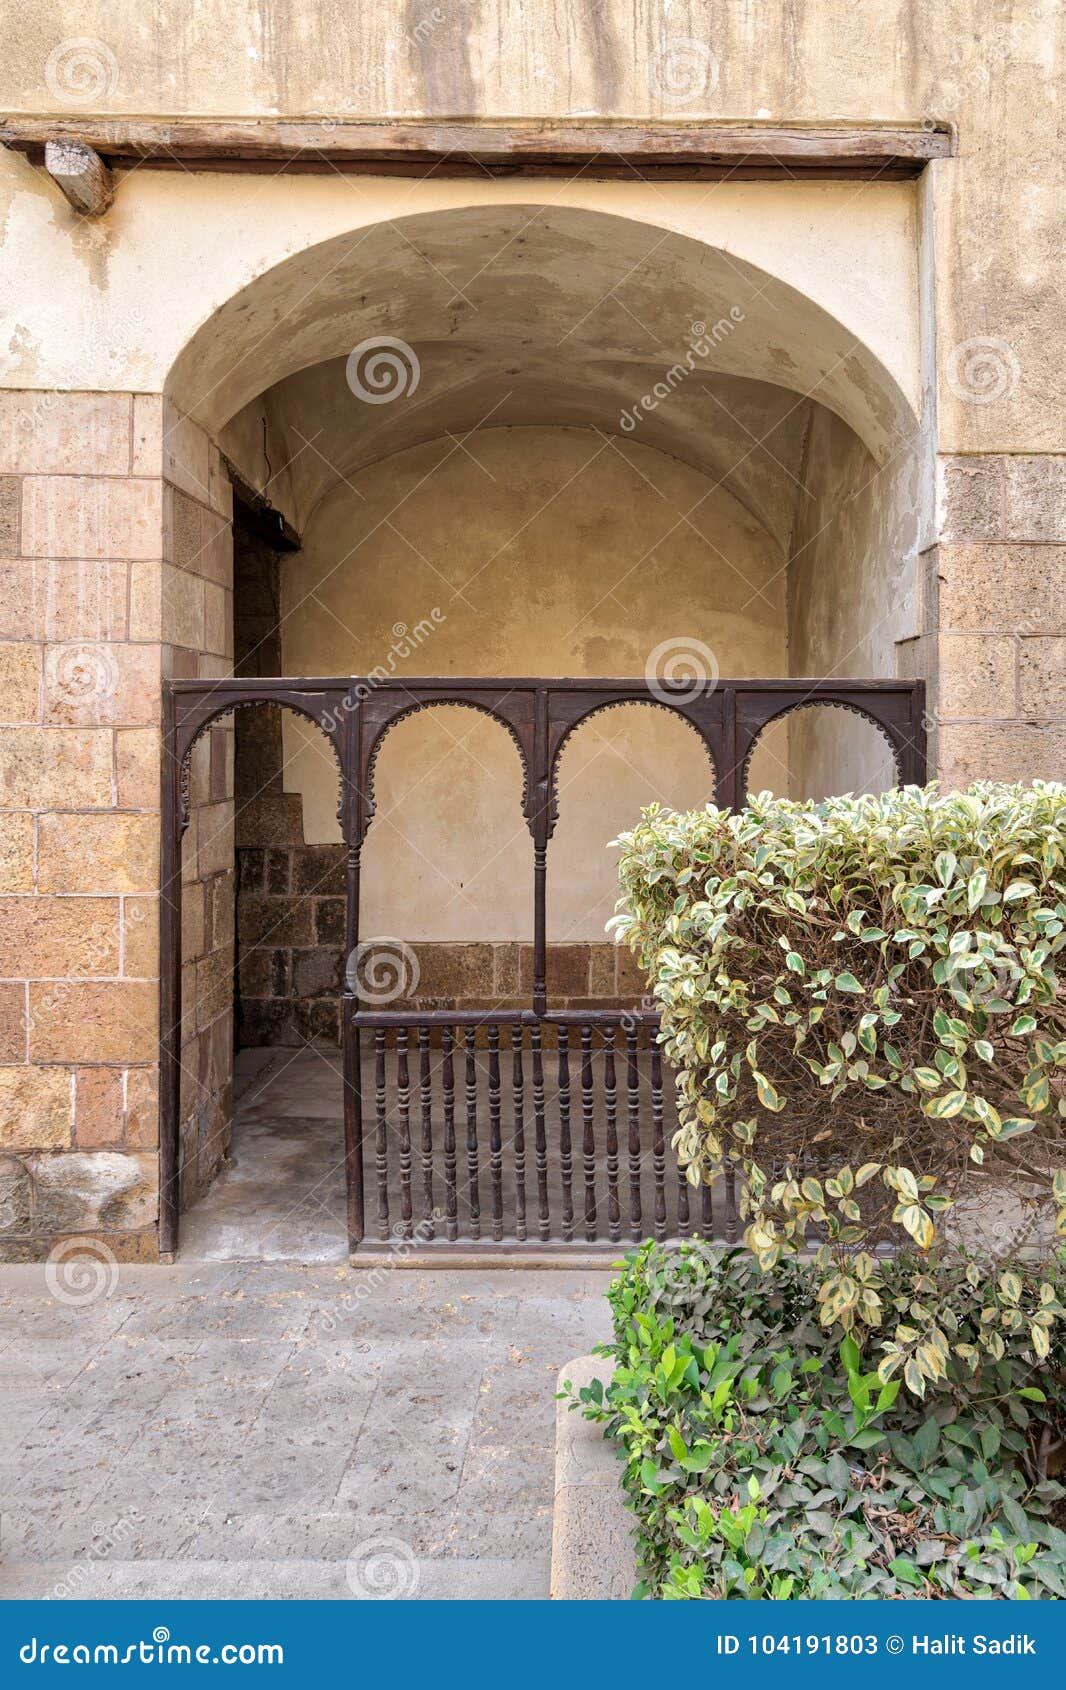 embedded space with wooden balustrade and wooden arches behind a planted flower box at the external wall of an old historic house